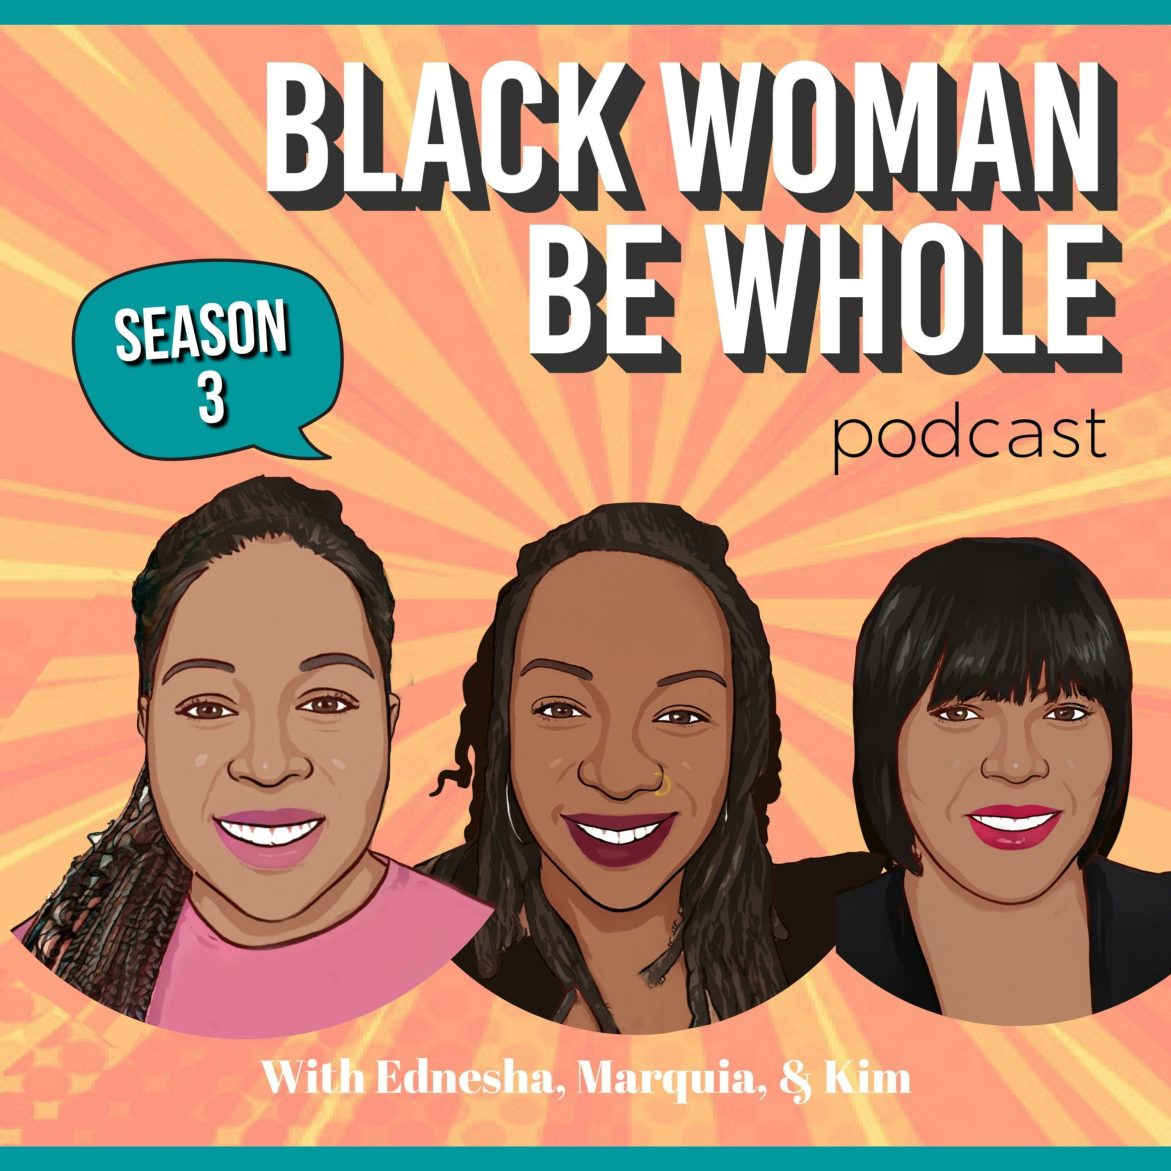 Black Podcasting - It's a new year, but does it have to be a new me?